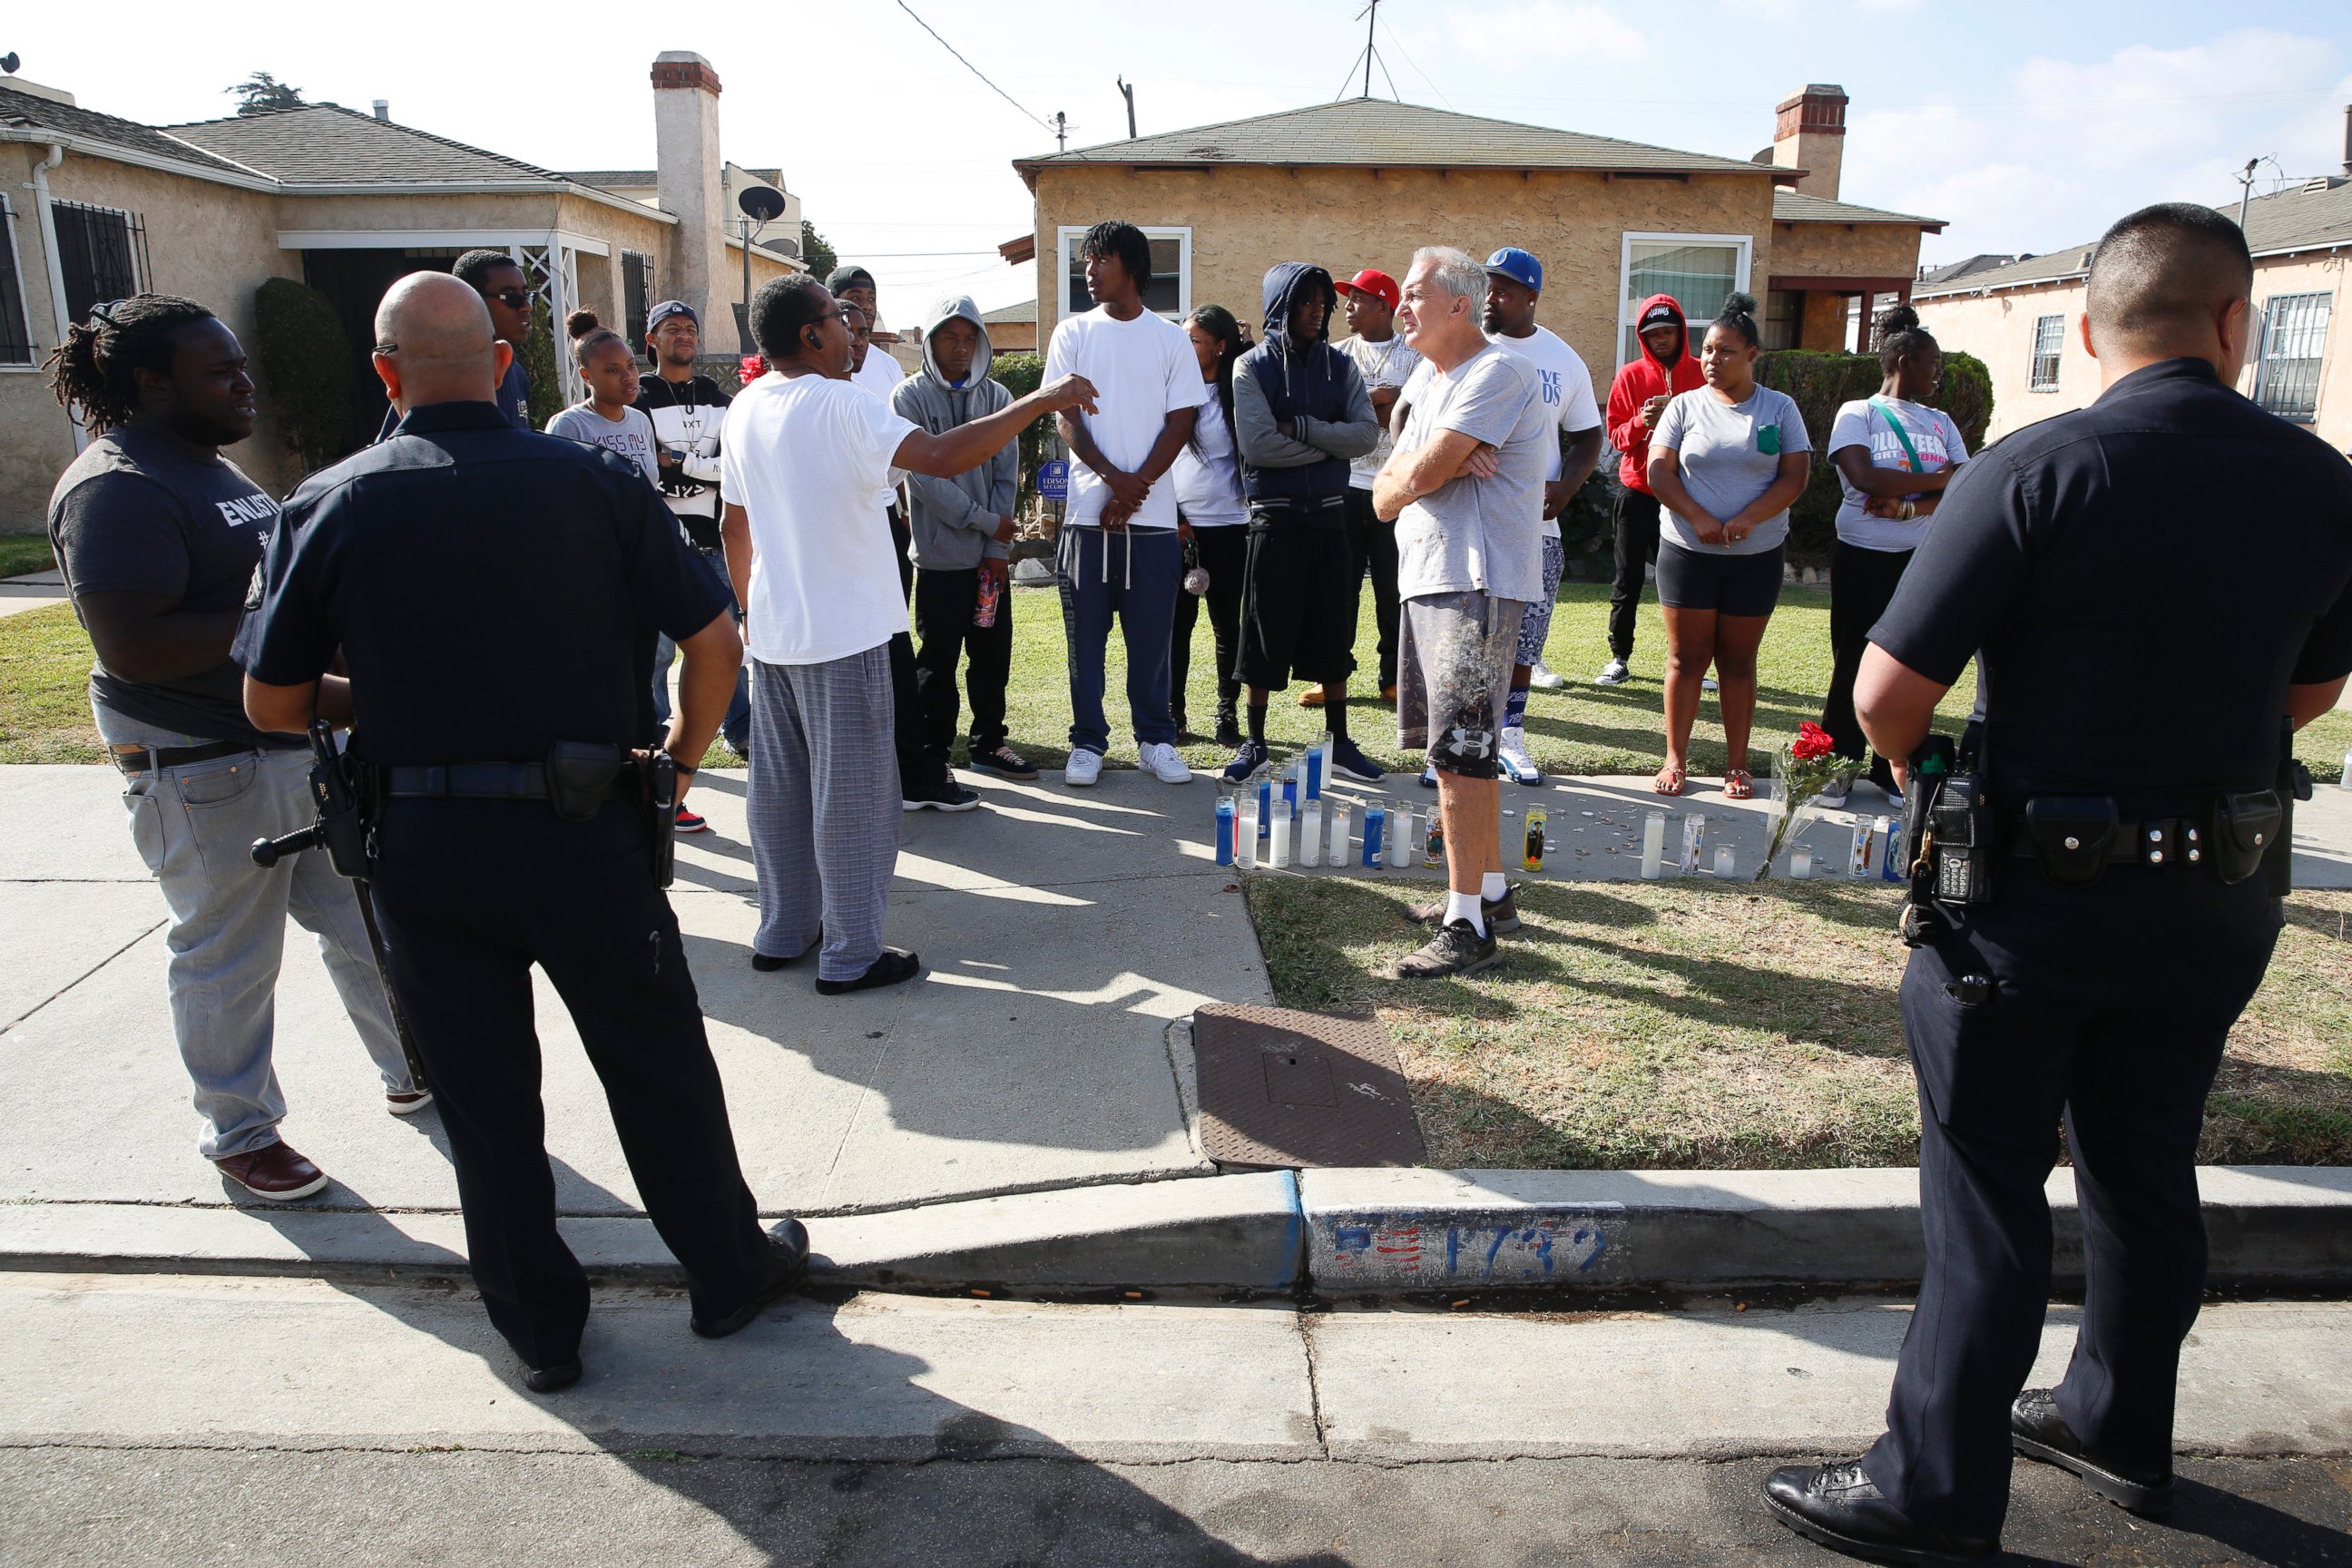 PHOTO: Los Angeles Police officers speak to neighbors and members of the community gathered around a makeshift memorial outside a residence, Oct. 2, 2016.